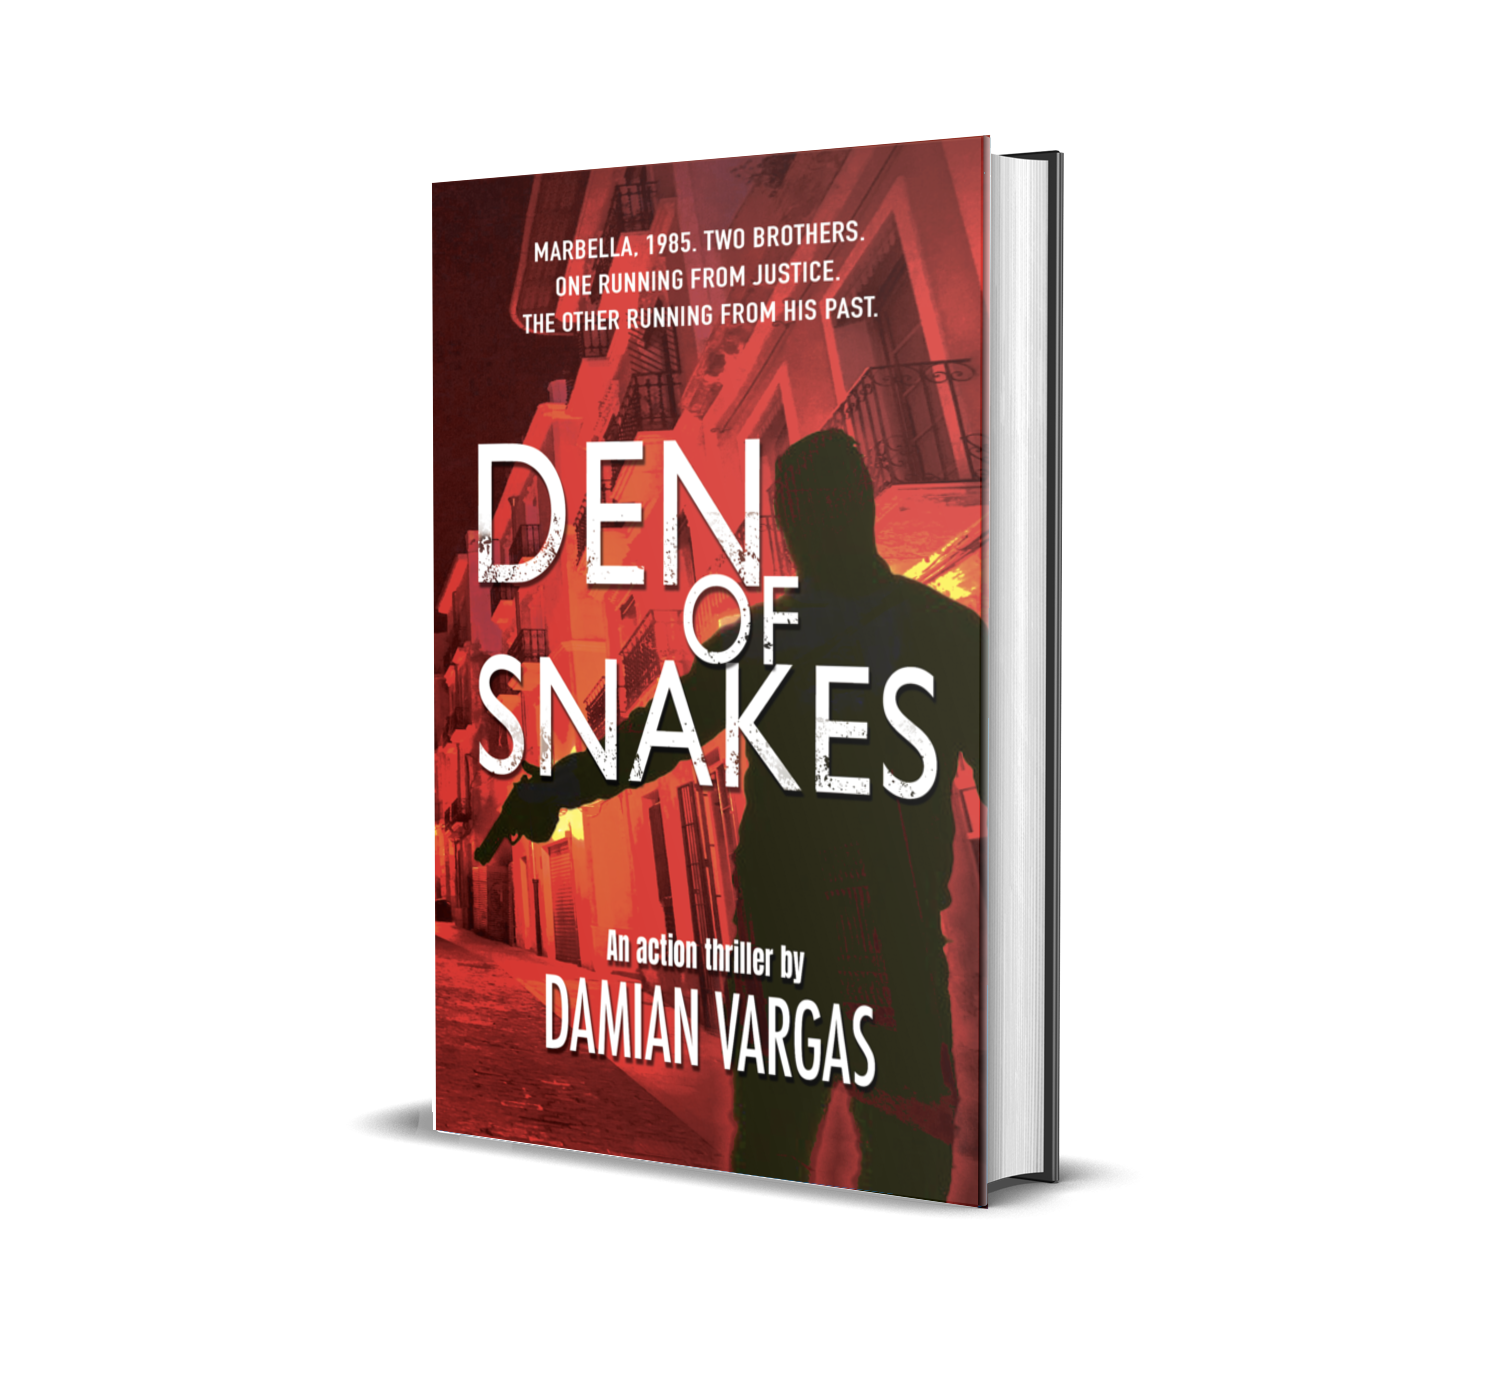 Den Of Snakes by Damian Vargas